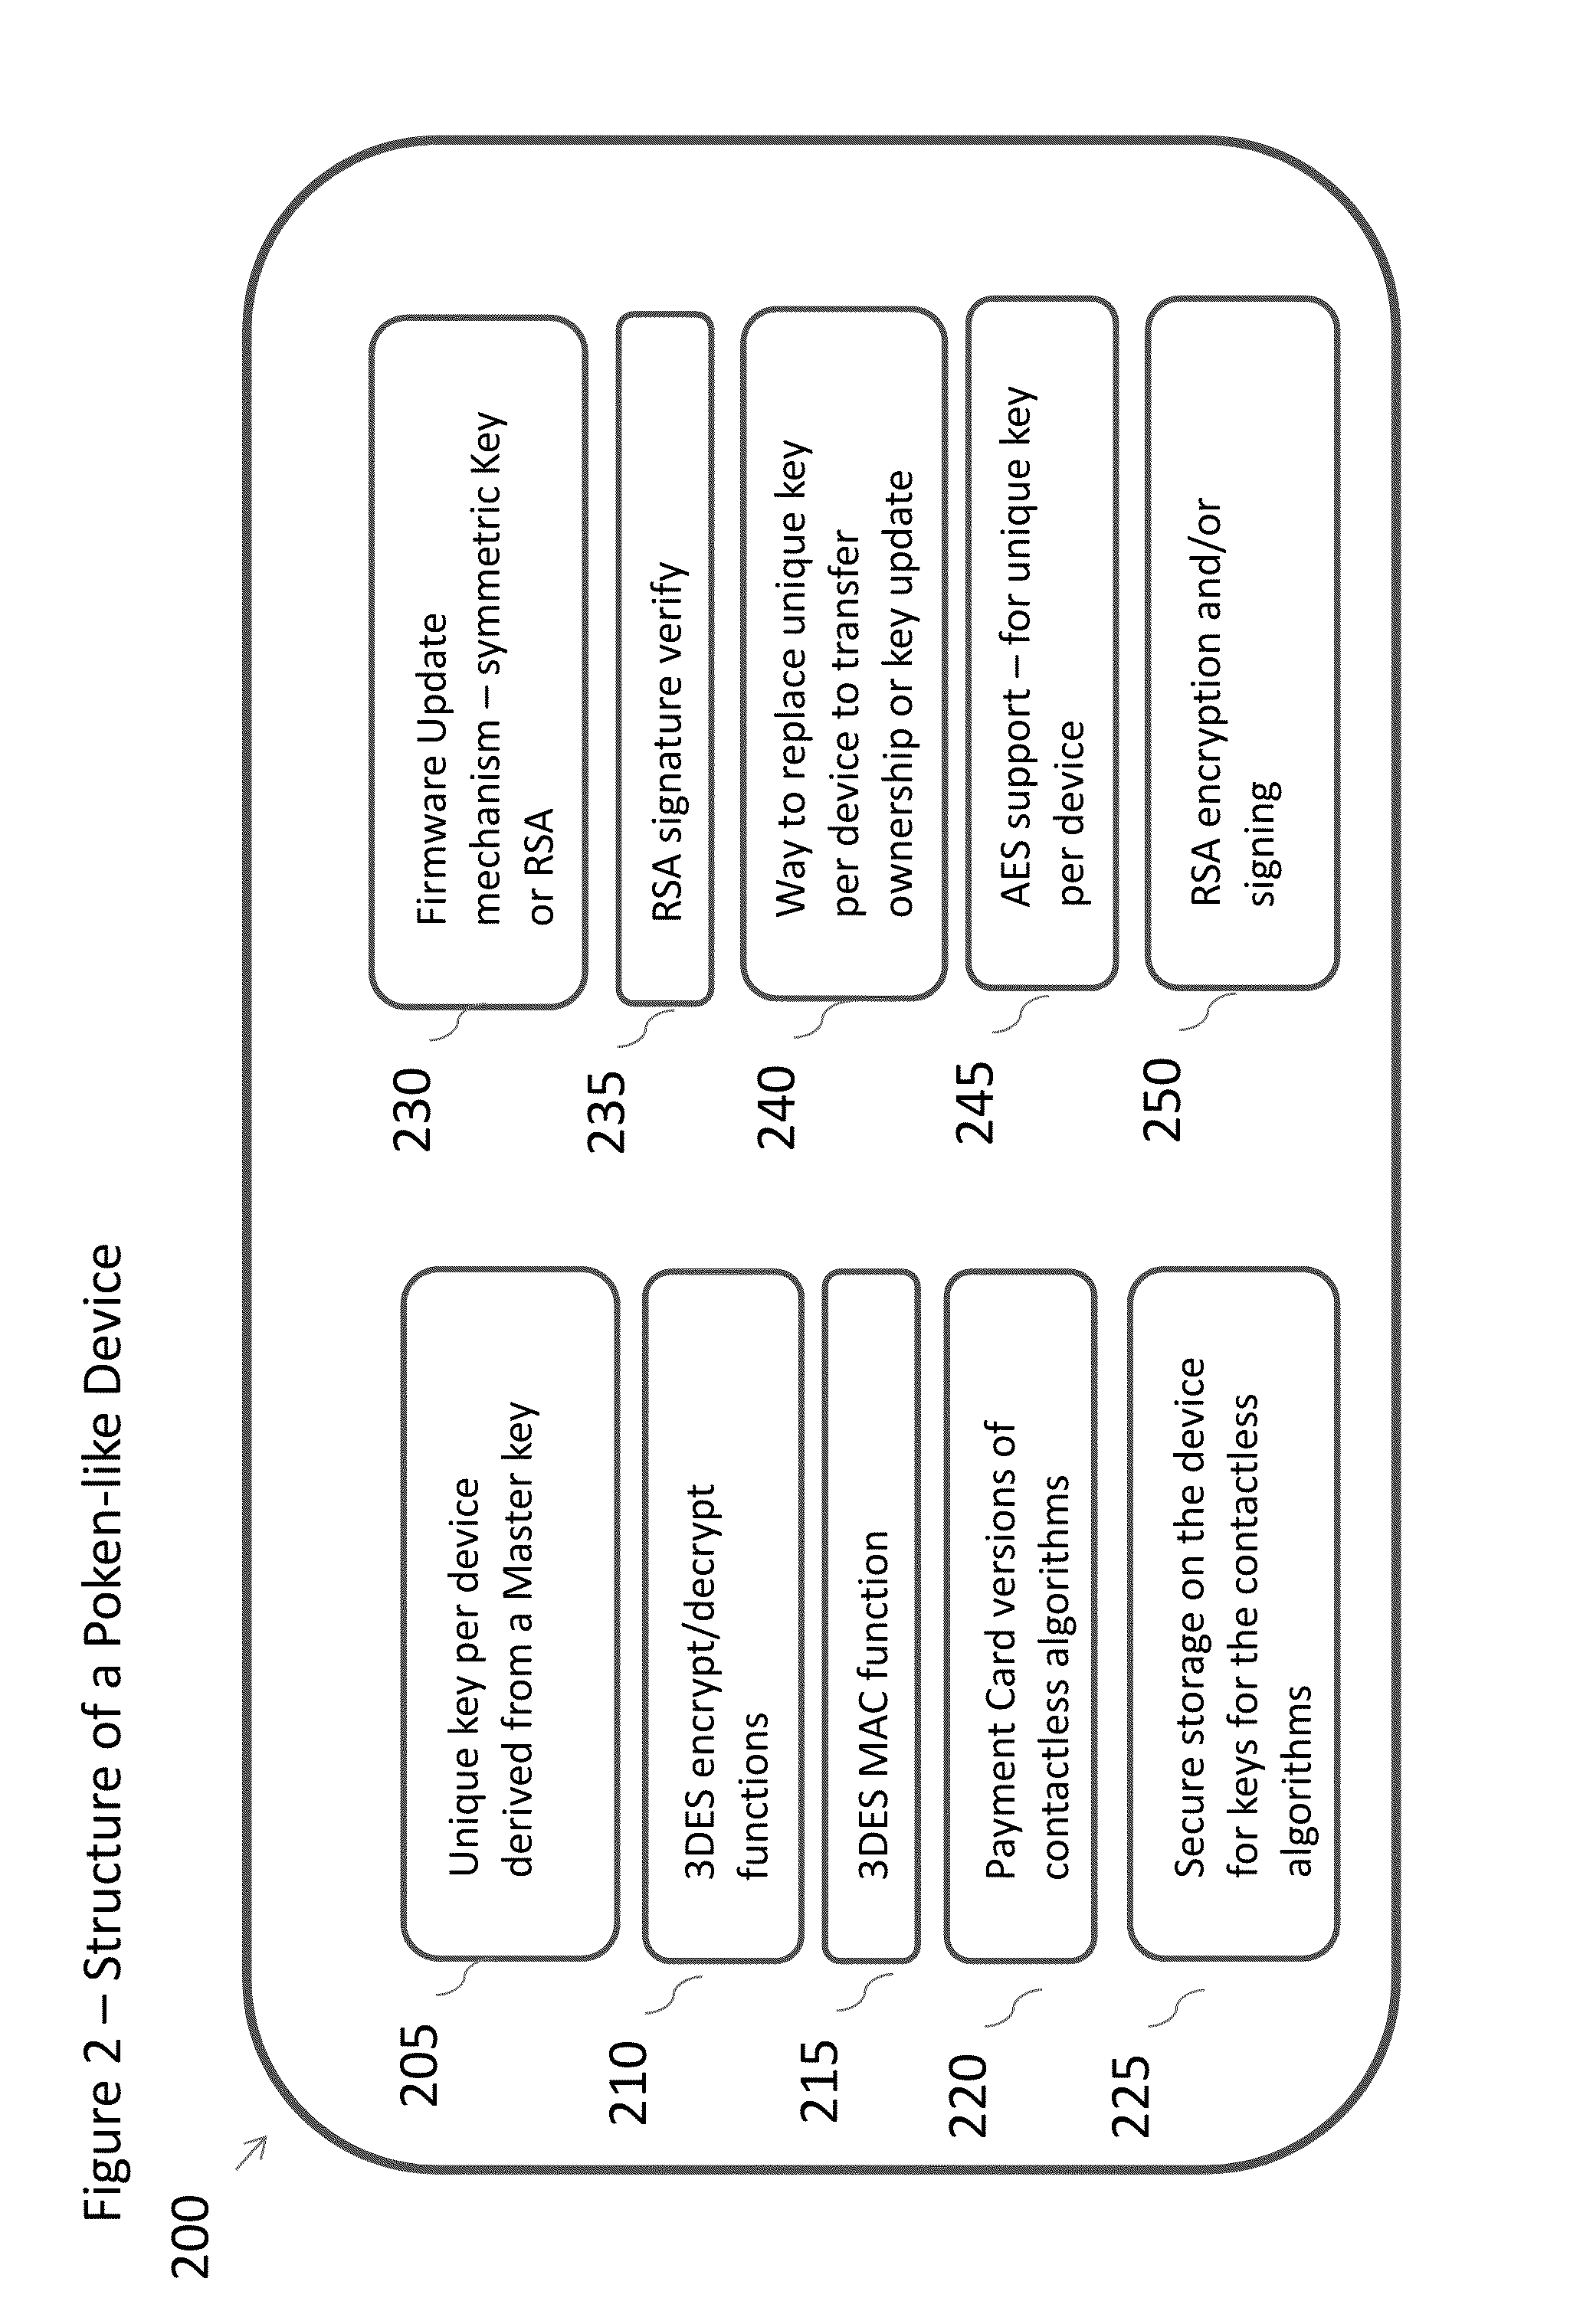 Storing and forwarding credentials securely from one RFID device to another